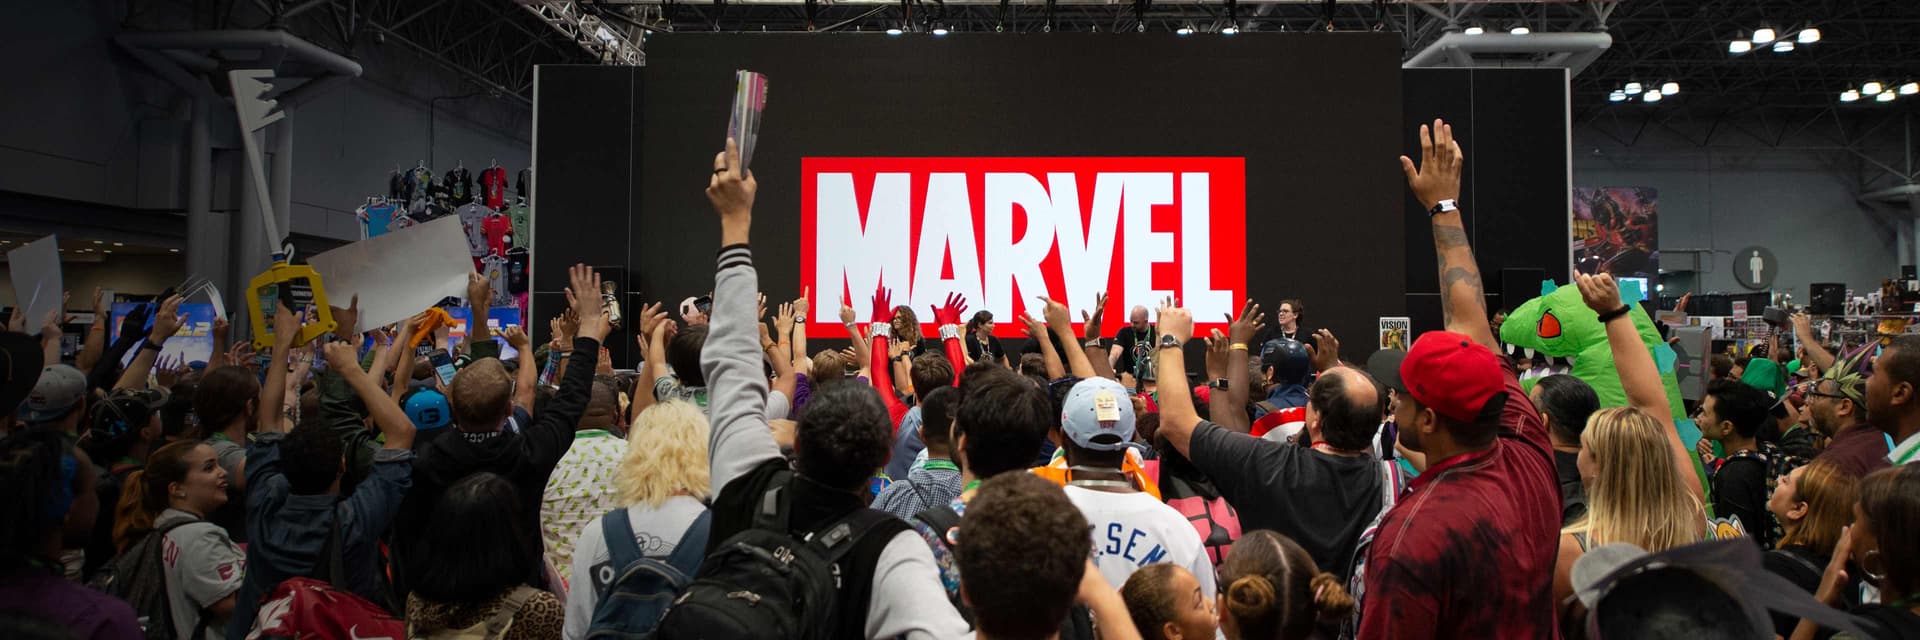 Watch Marvel LIVE! at New York Comic Con NYCC 2019